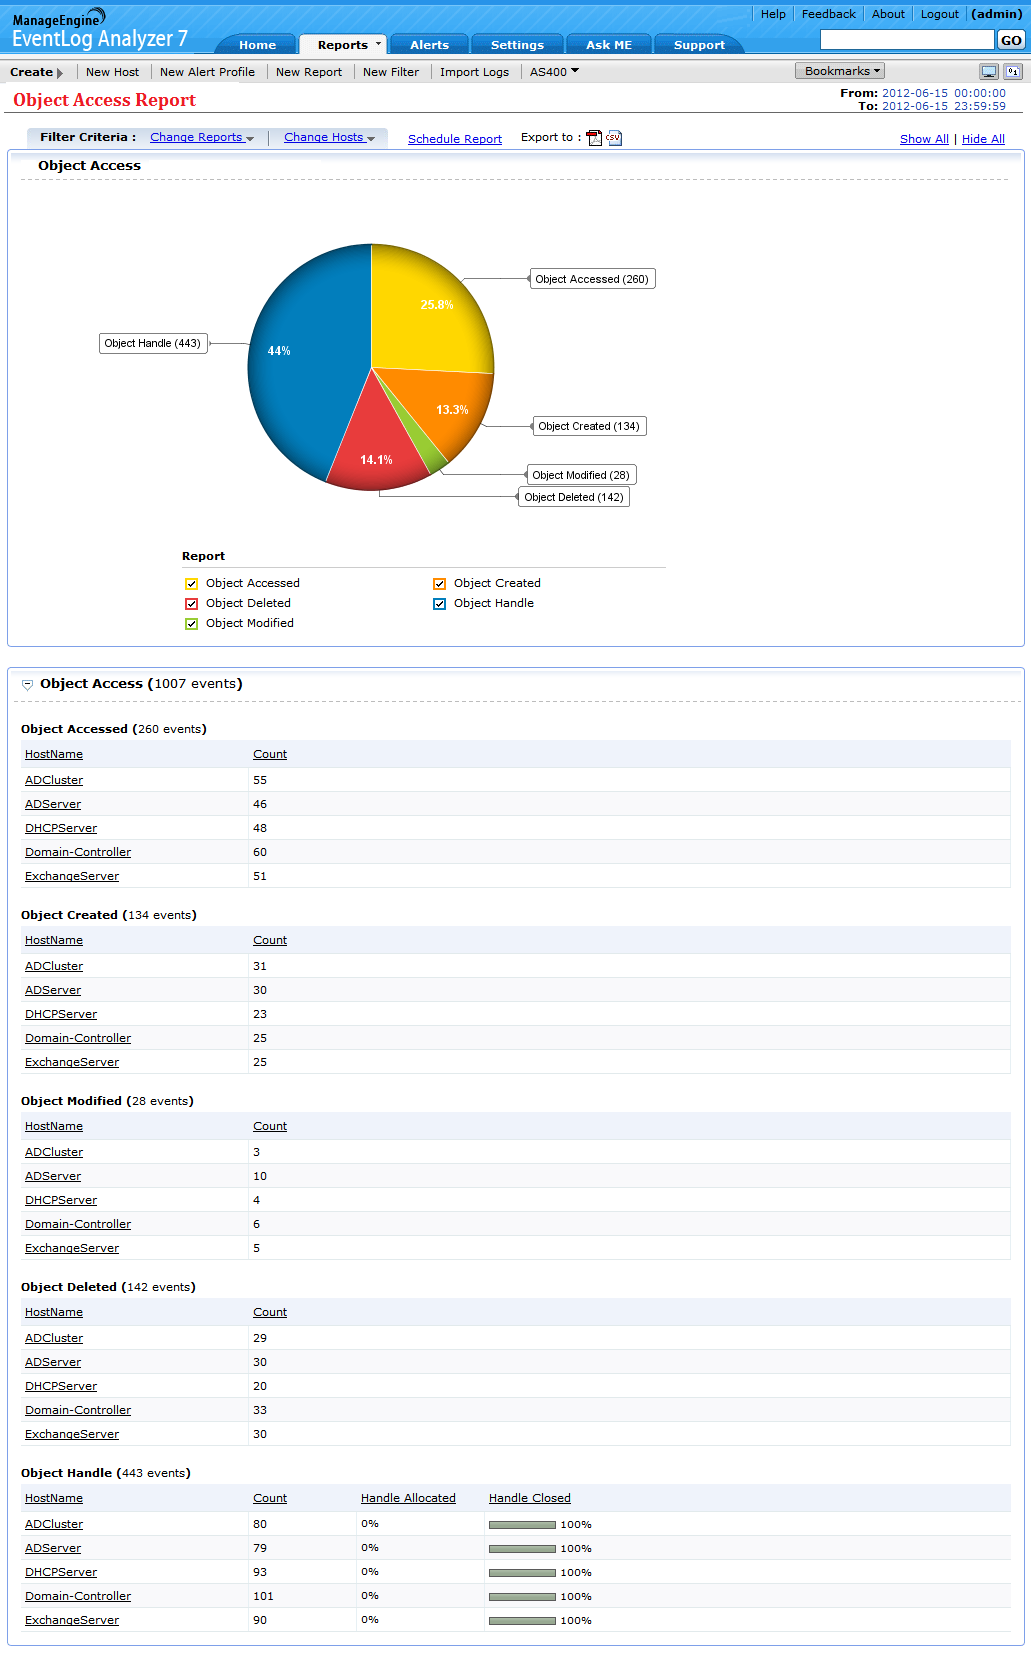 Object Access Auditing Dashboard in EventLog Analyzer